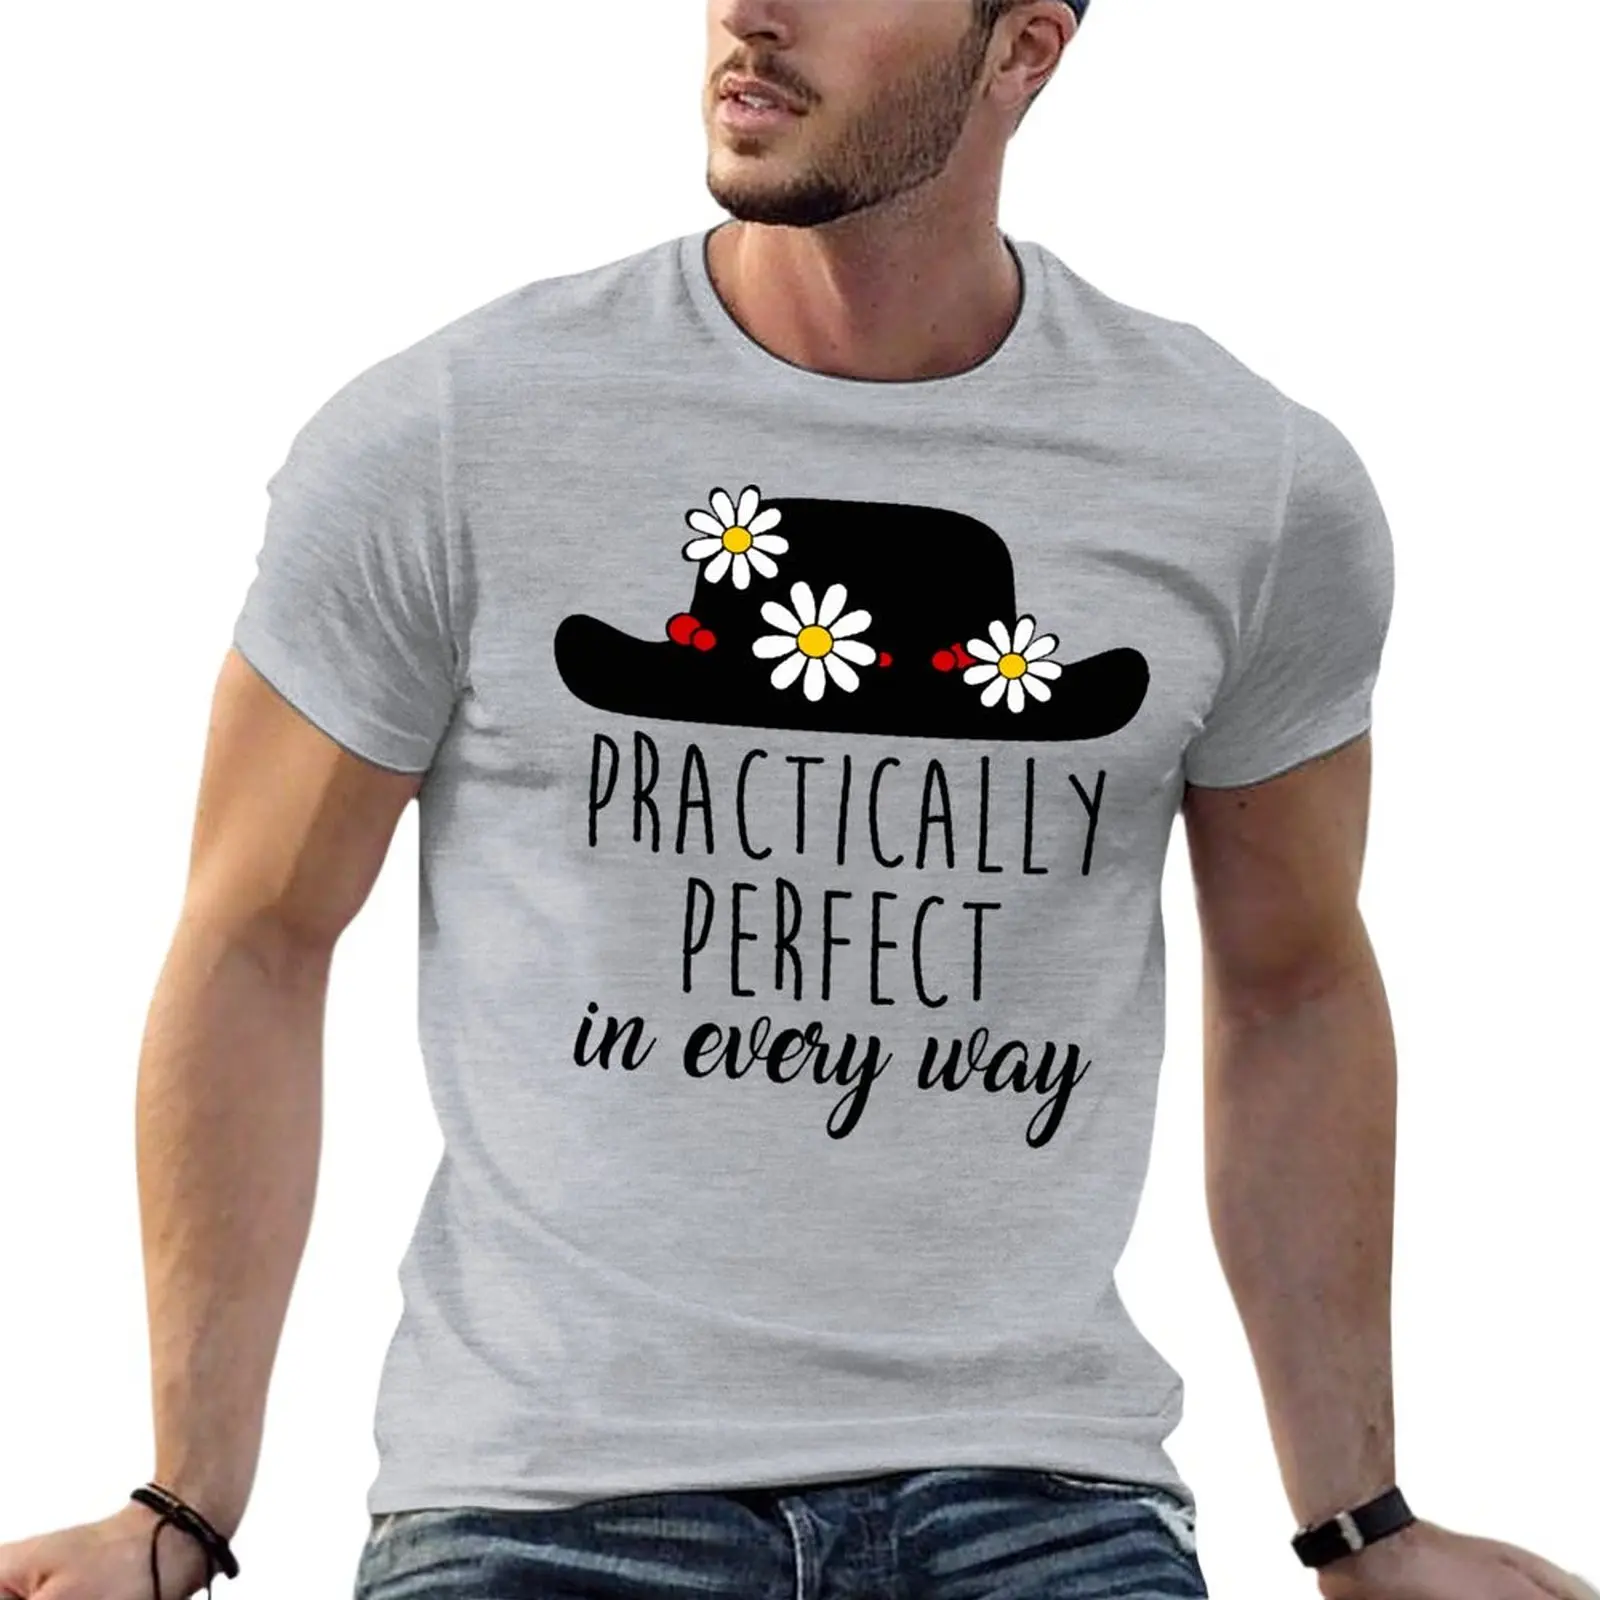 

Mary Poppins Practically Perfect In Every Oversize Tshirt Branded Men'S Clothes 100% Cotton Streetwear Plus Size Top Tee